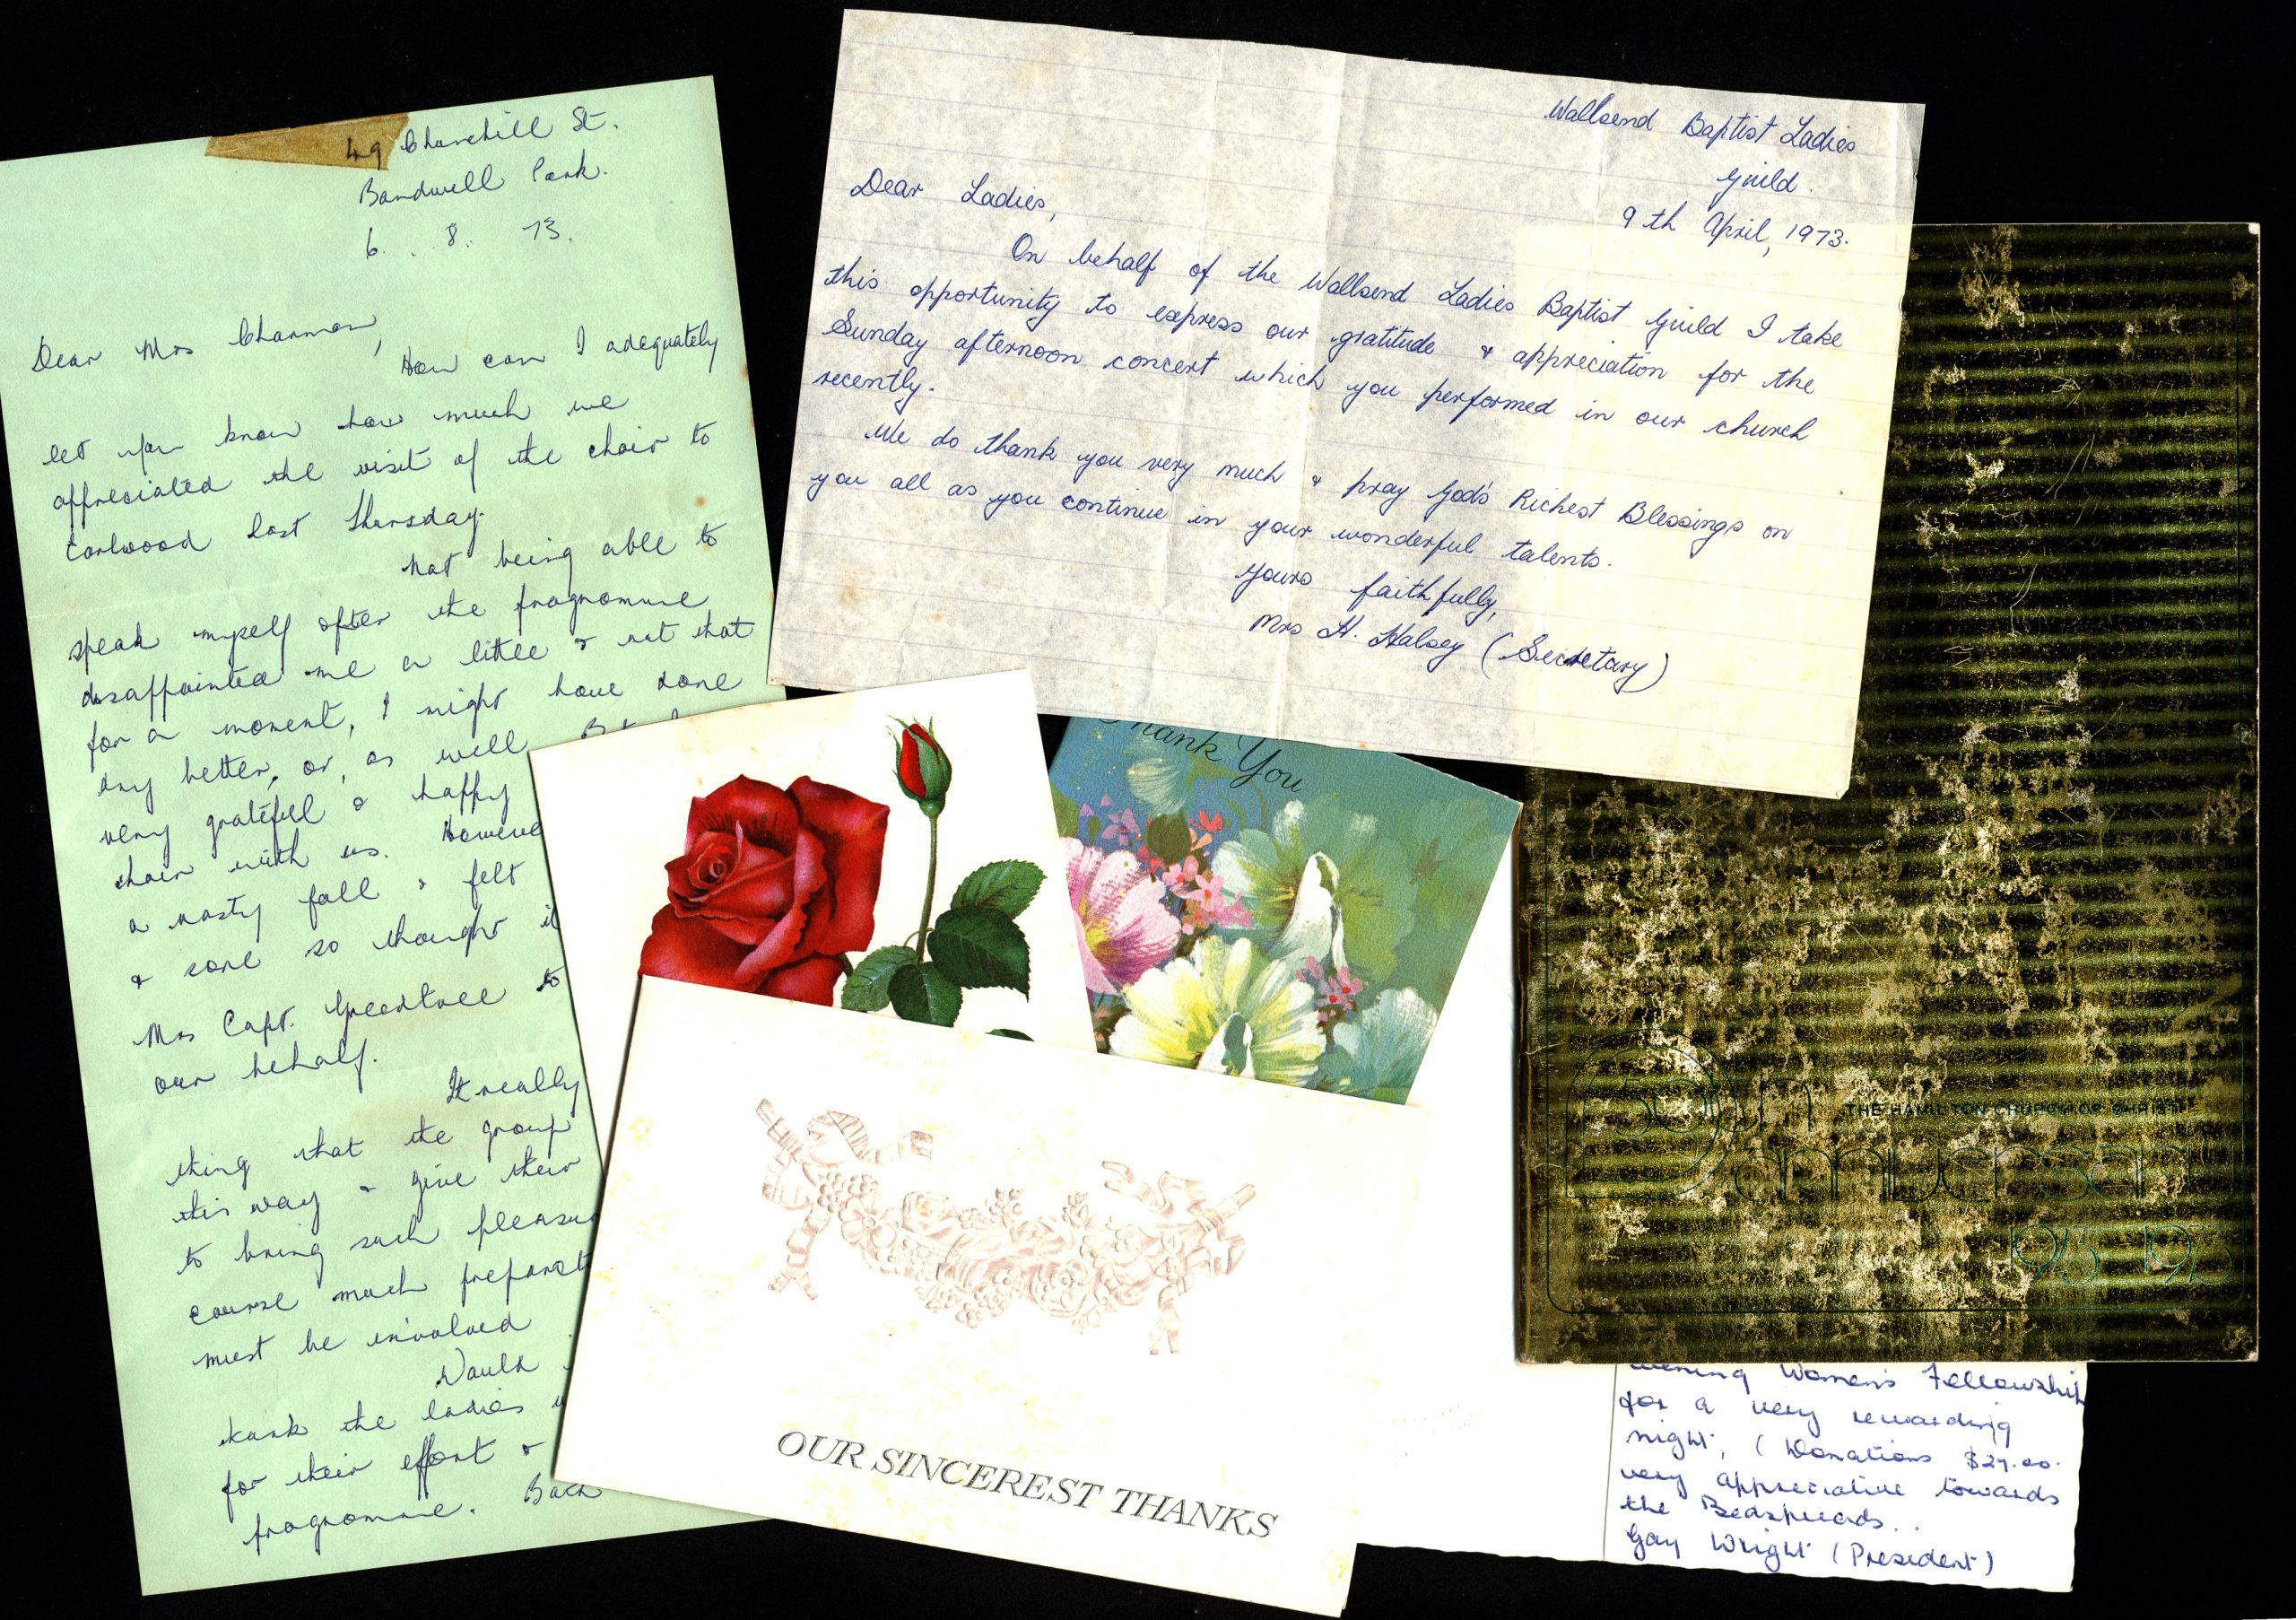 Assortes yellowed pages with handwritten cursive and postcards with illustrations of flowers.